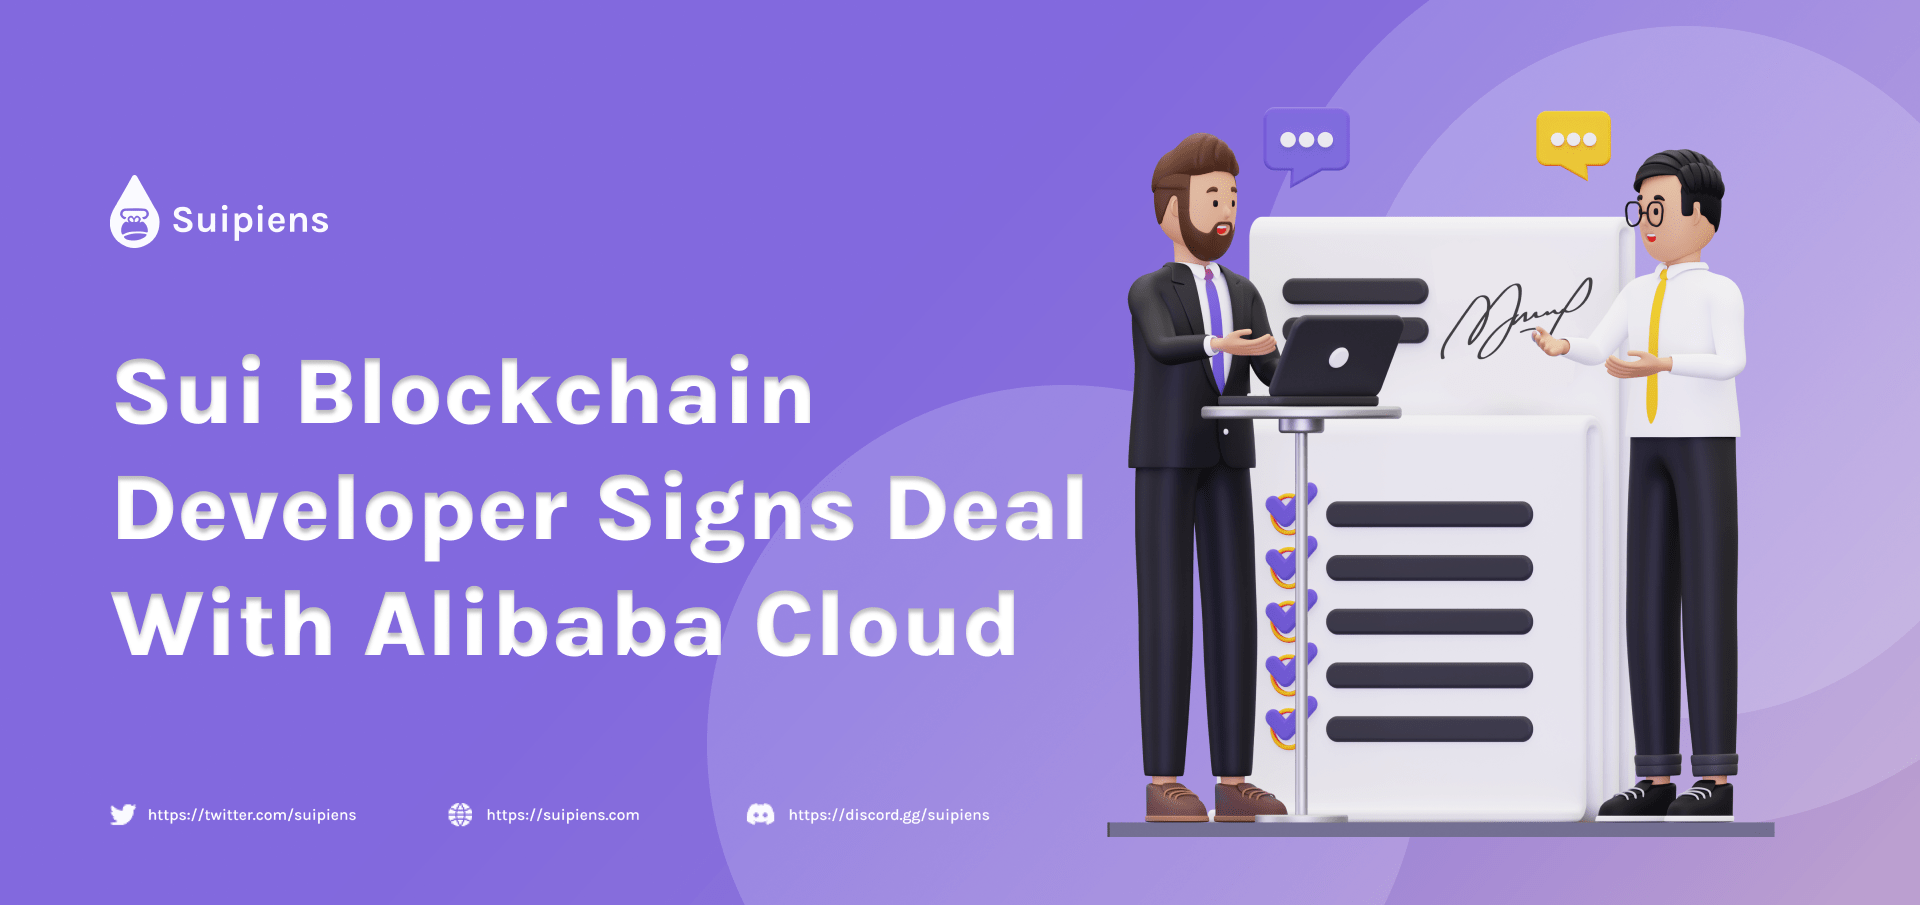 Sui Blockchain Developer Signs Deal With Alibaba Cloud